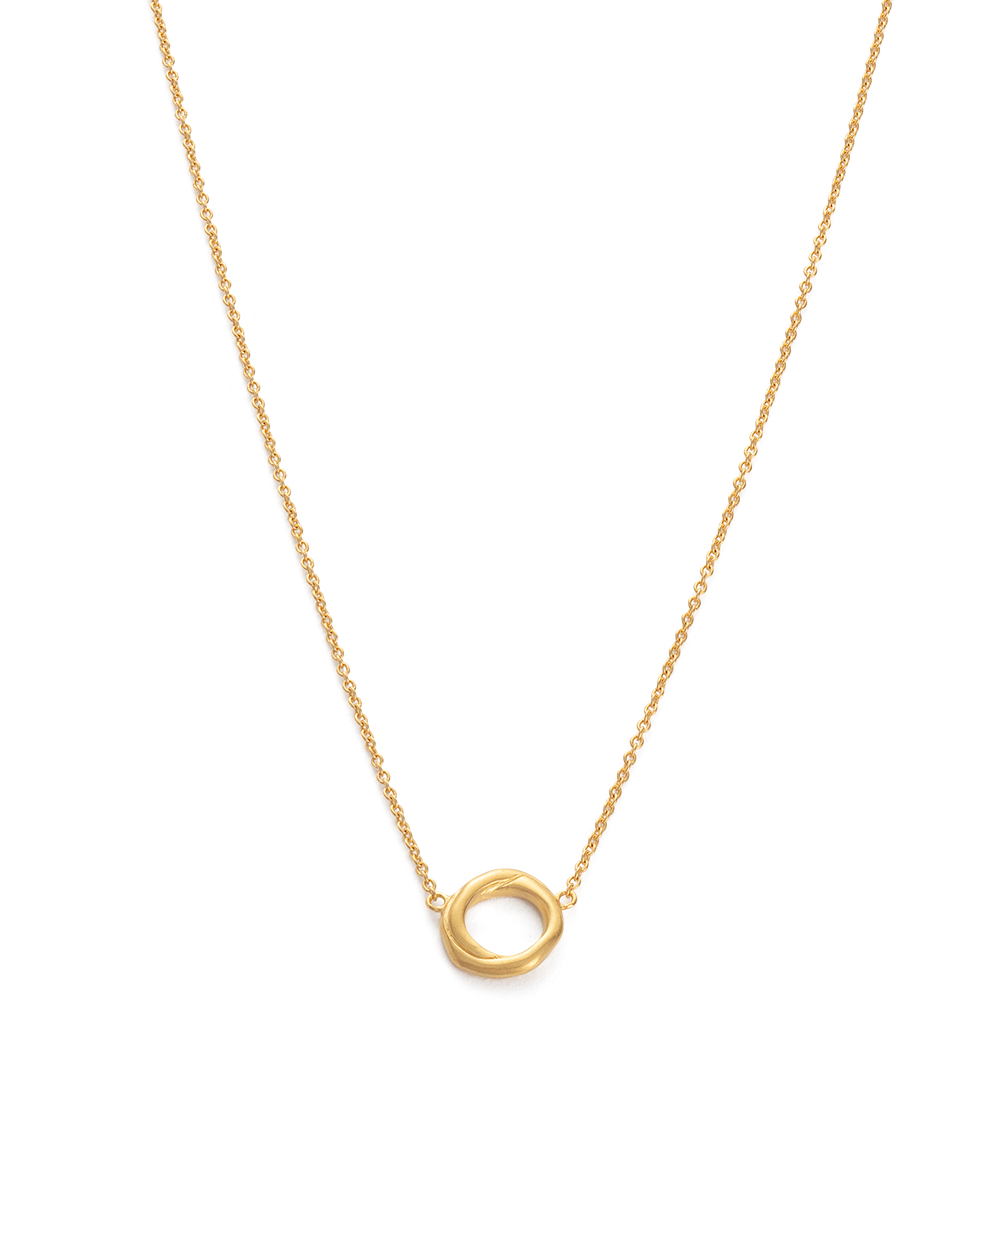 INFINITE NECKLACE (18K GOLD PLATED) - IMAGE 1